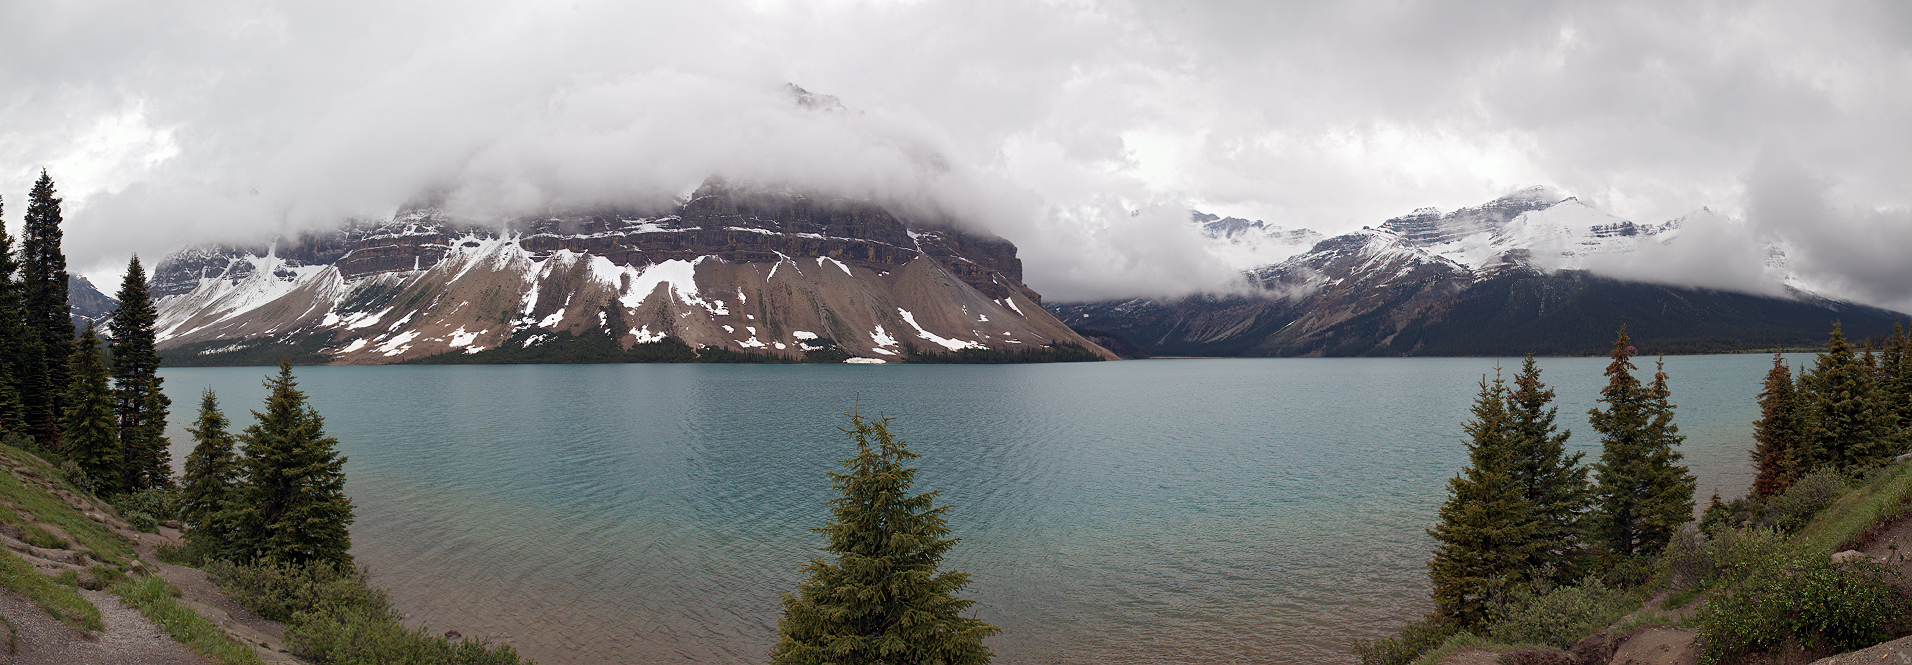 Bow Lake Lookout #2